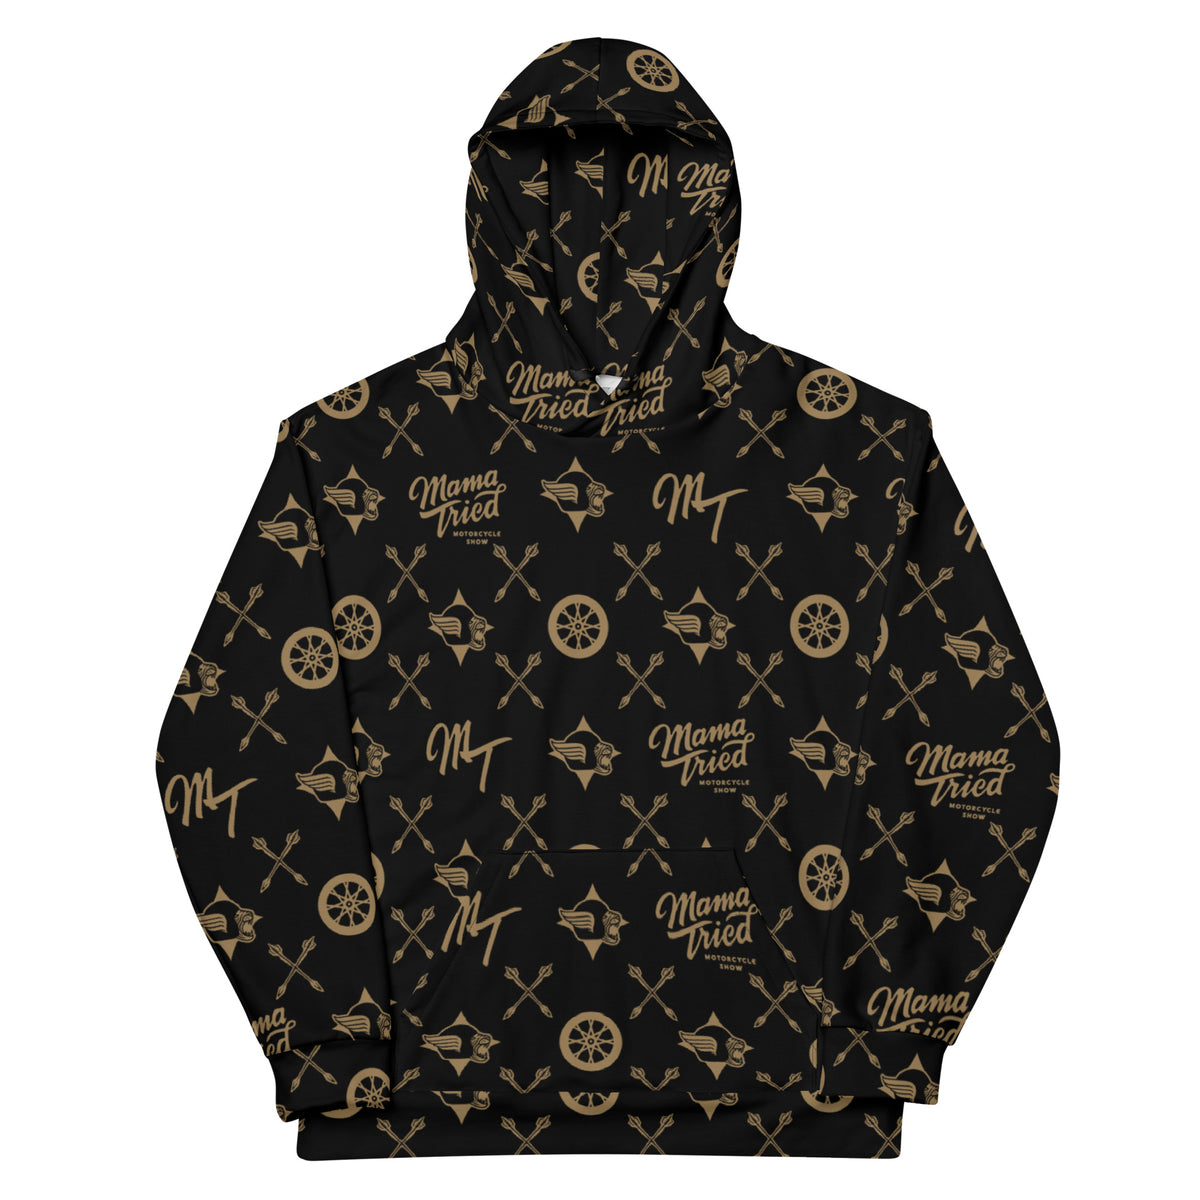 Louis vuitton monogram hoodie sourced for a customer under RRP